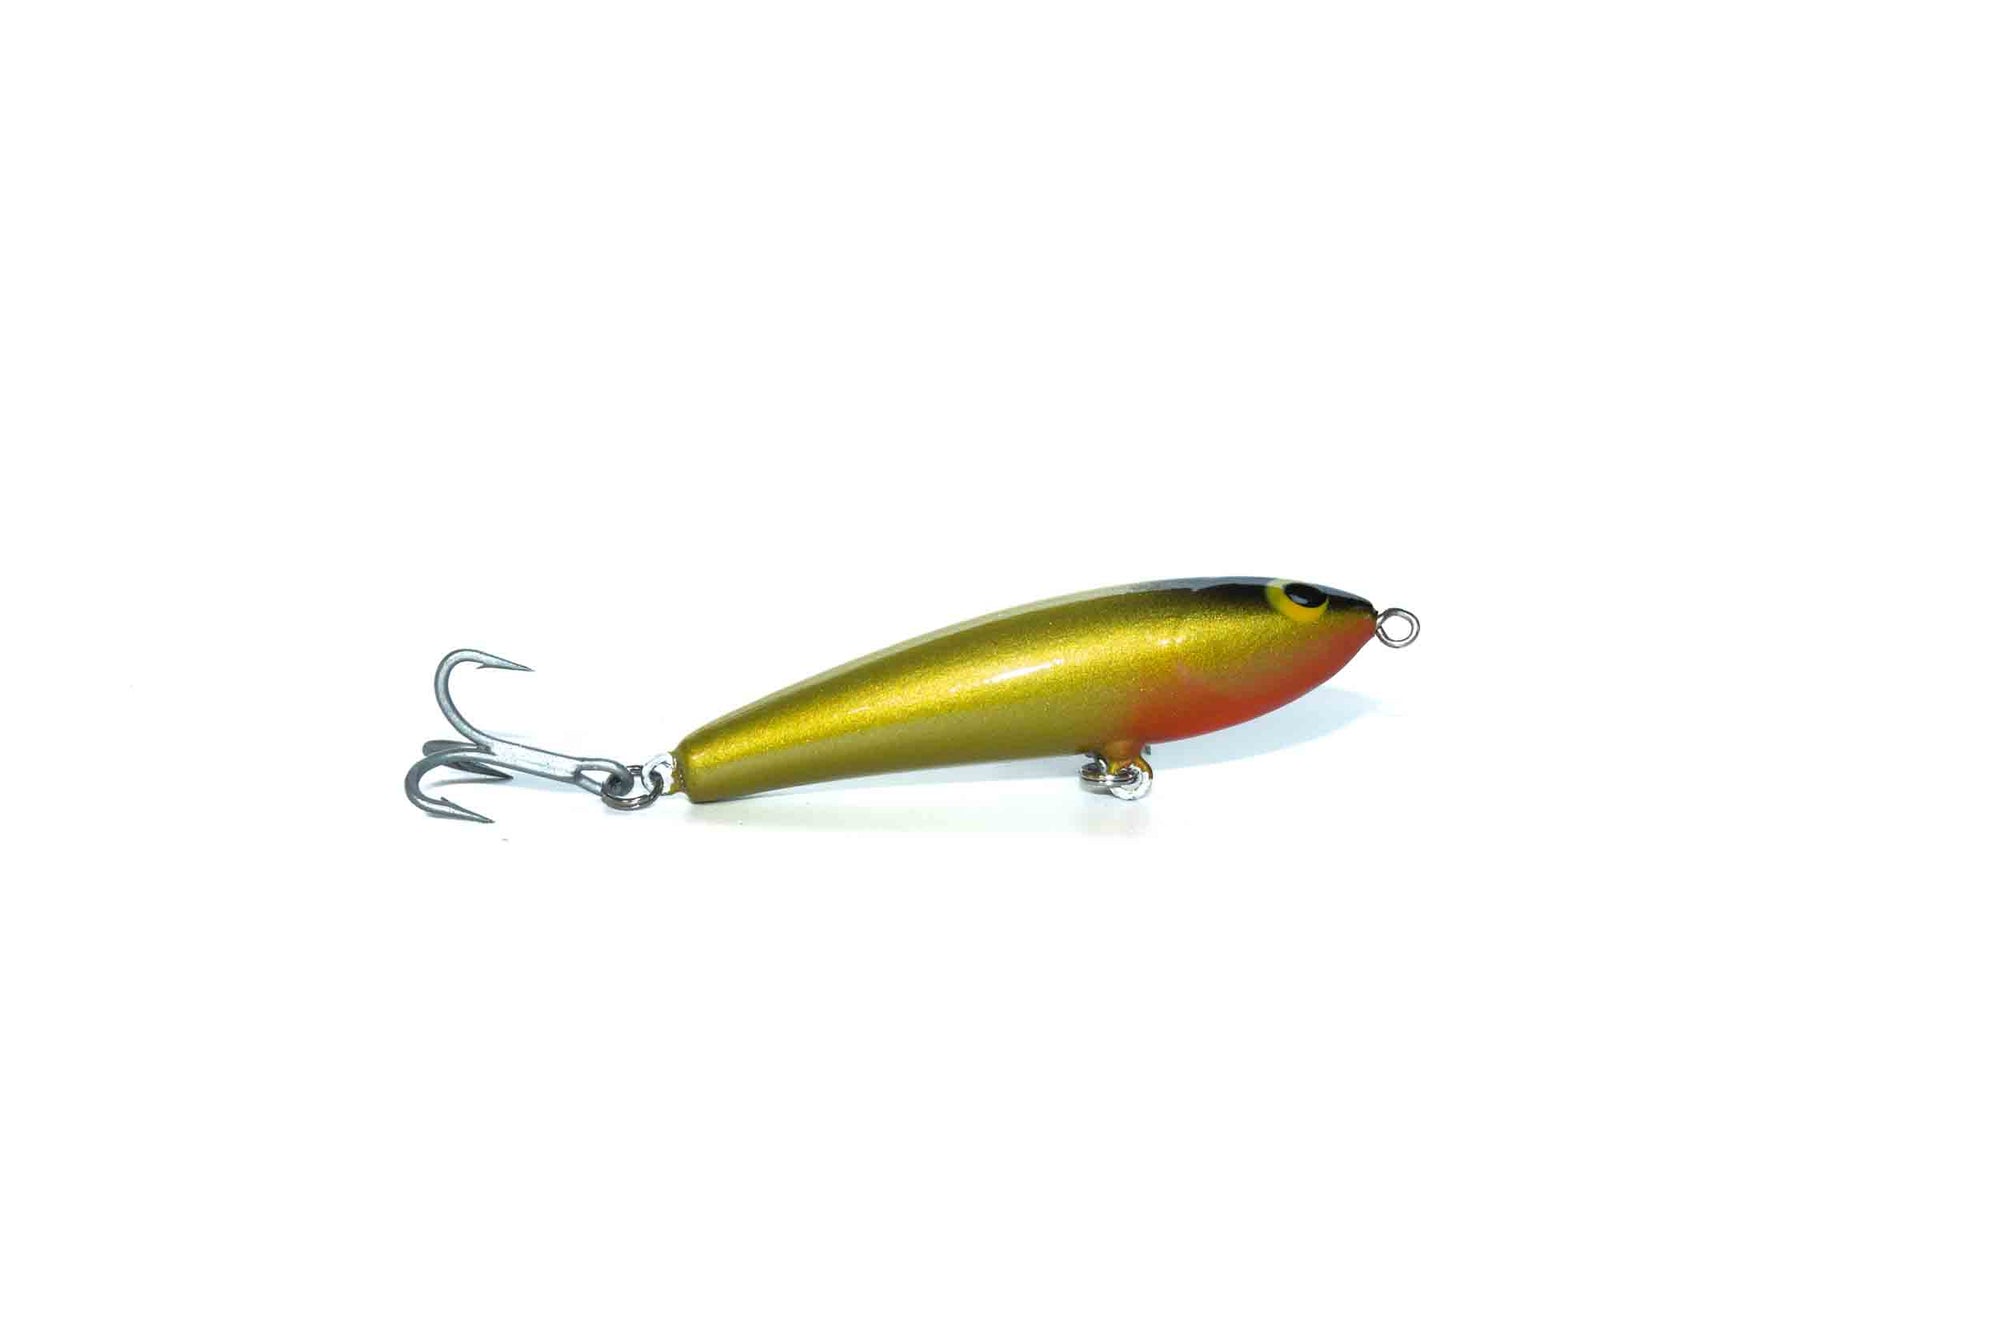 Mutt Stix - 90mm Handcrafted Timber Fishing Lure